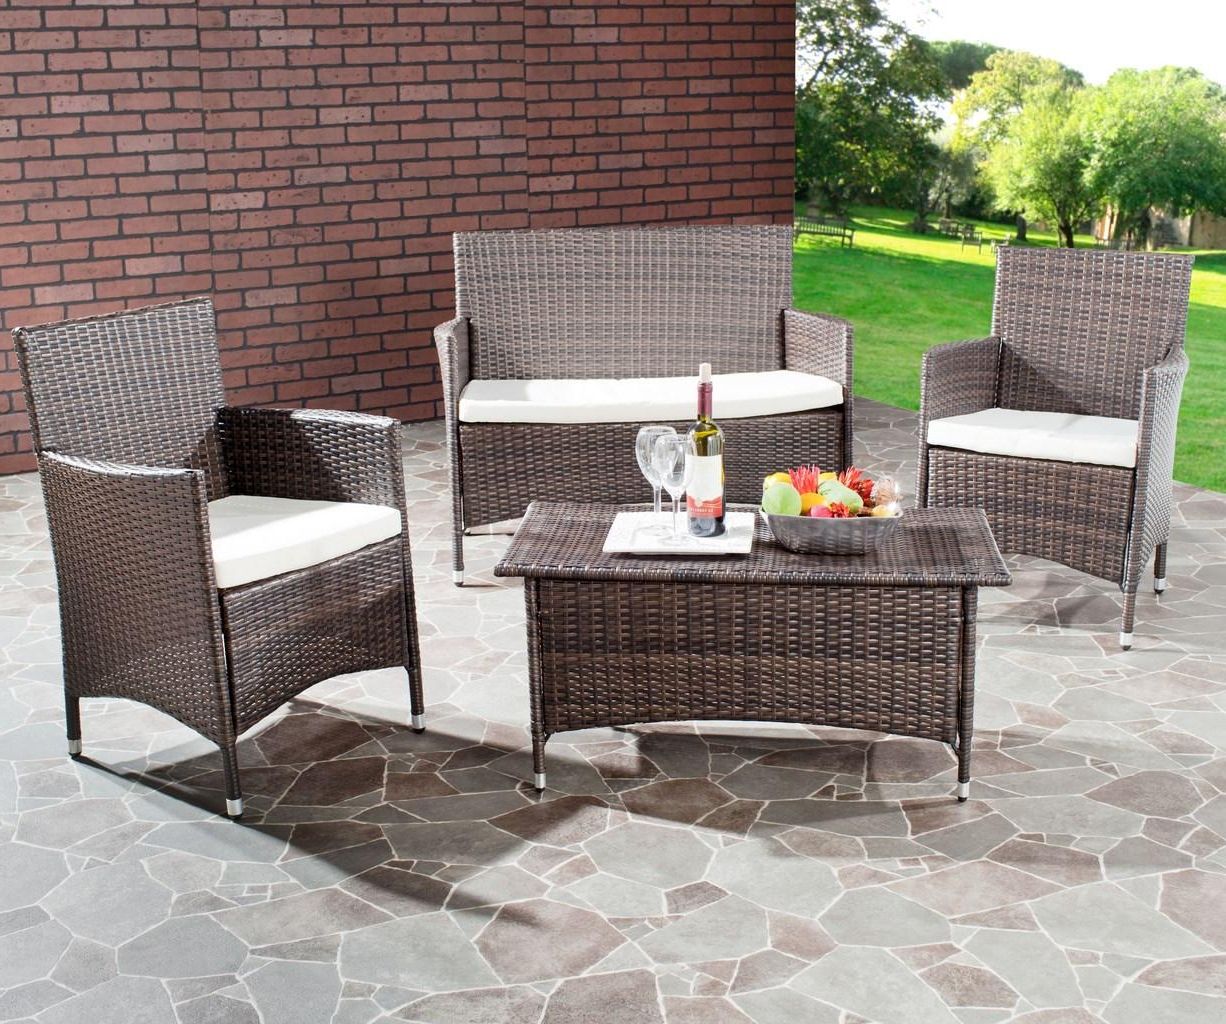 Best And Newest 4 Piece Outdoor Patio Sets Pertaining To Fox6005a Patio Sets – 4 Piece – Furnituresafavieh (View 6 of 15)